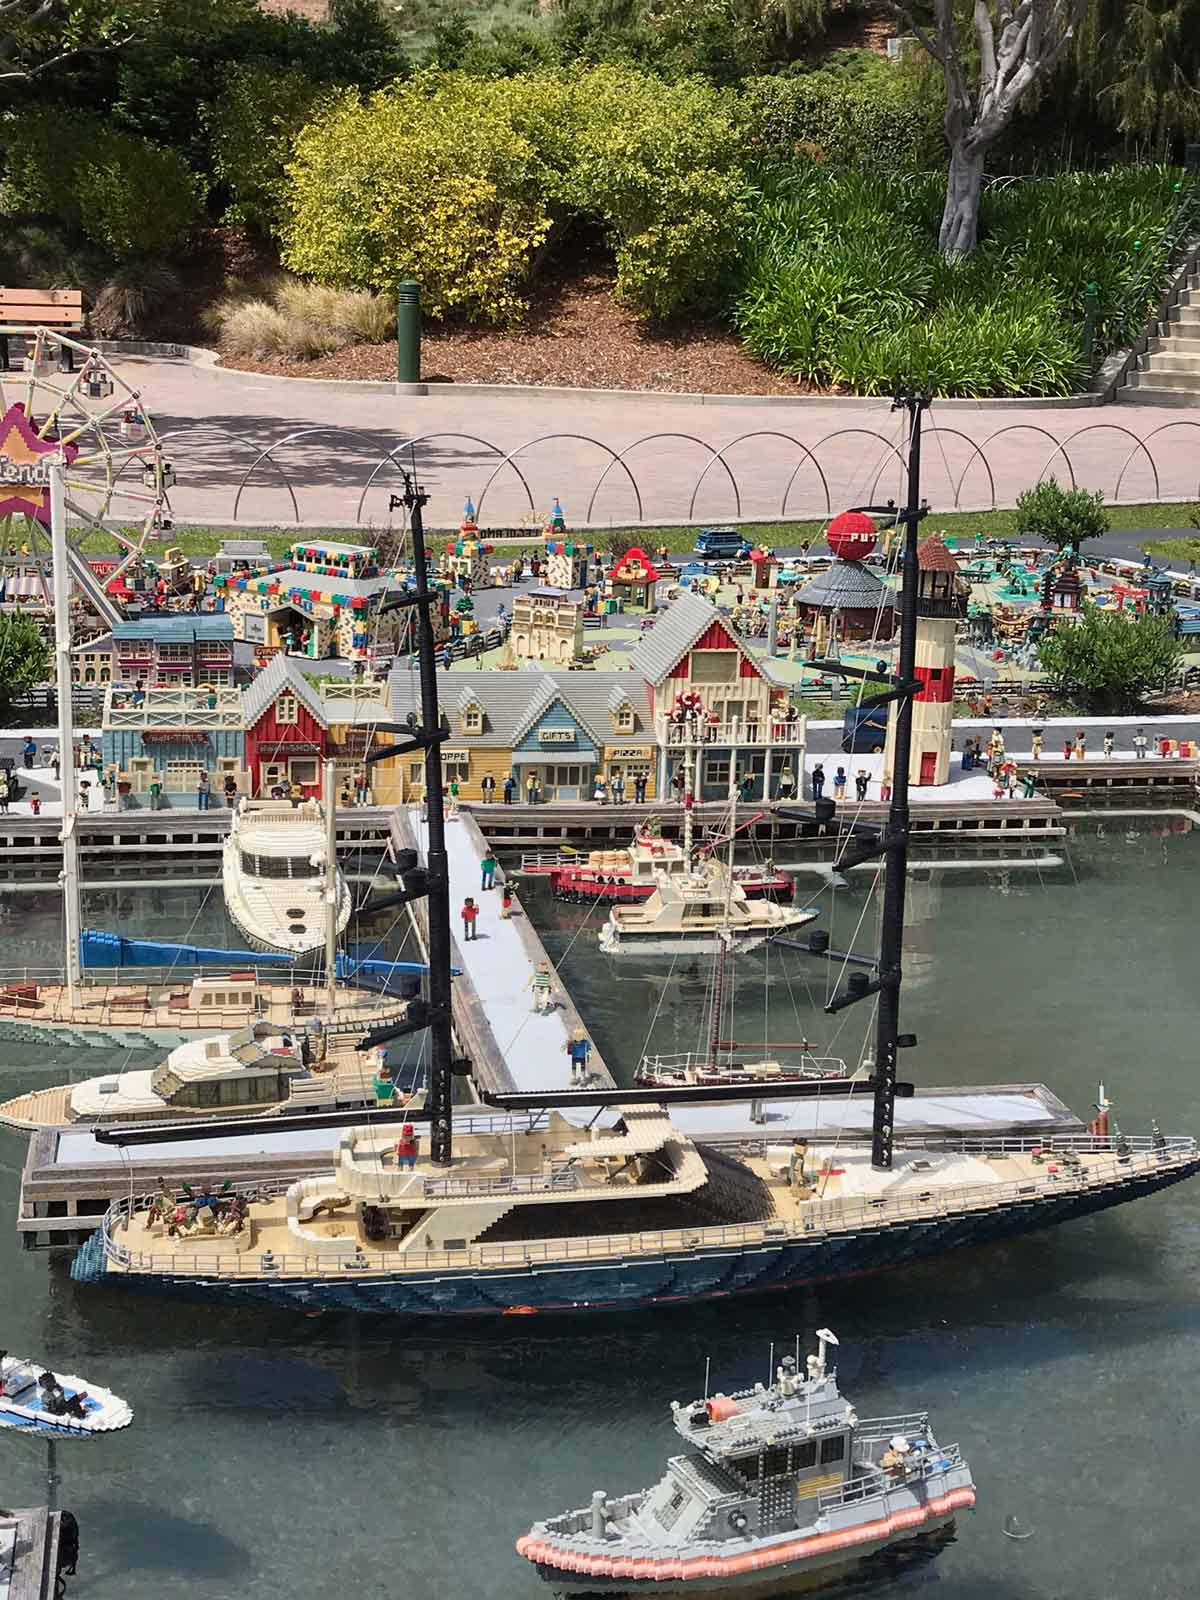 view of oceanside harbor at the legoland miniland.